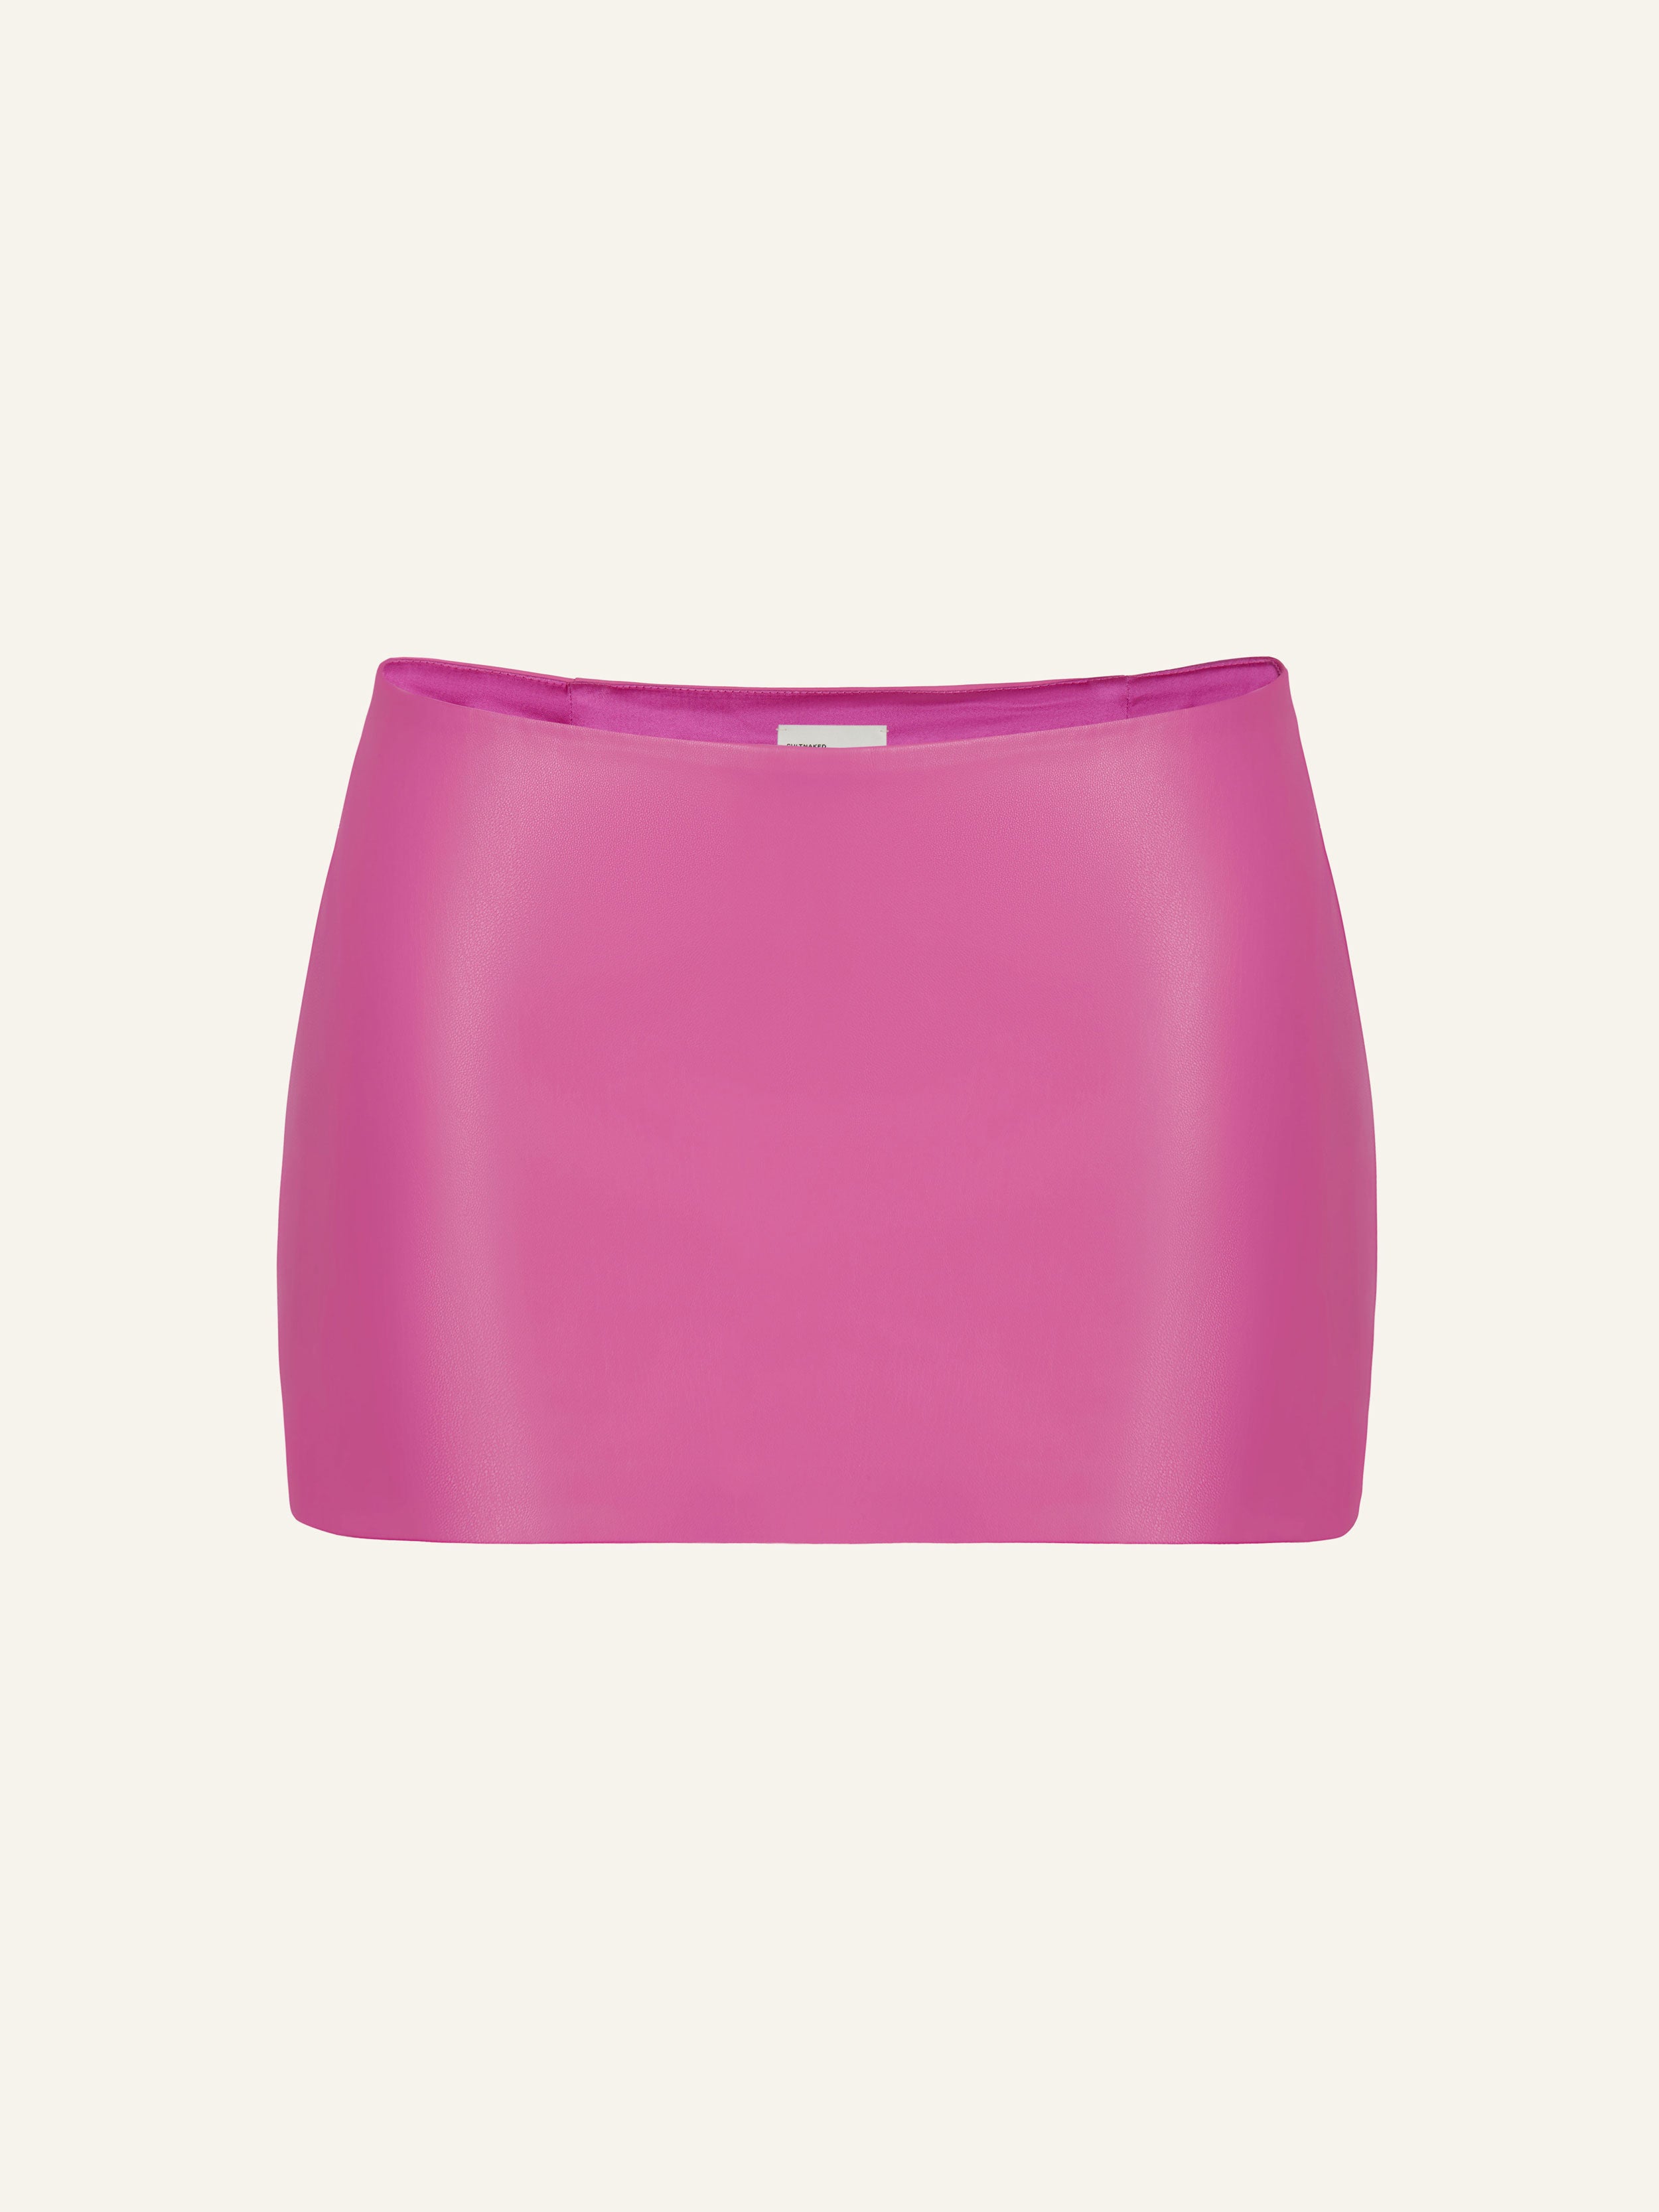 Product photography of a pink vegan leather low rise mini skort